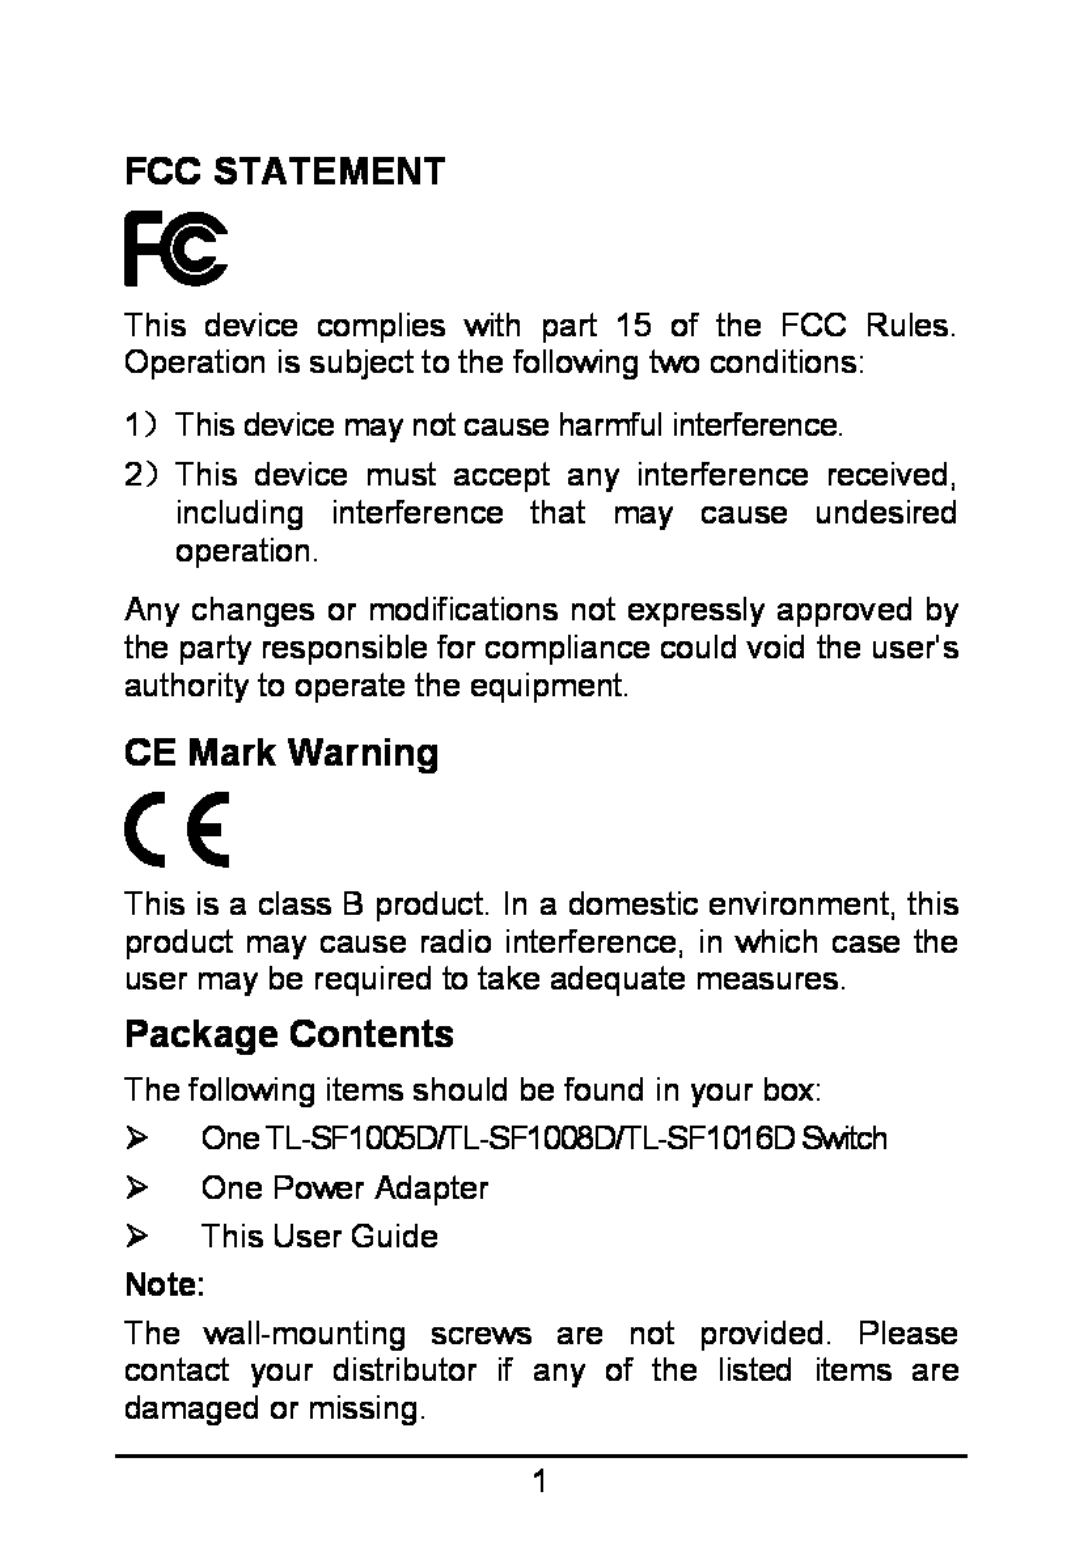 TP-Link TL-SF1005D manual Fcc Statement, CE Mark Warning, Package Contents 